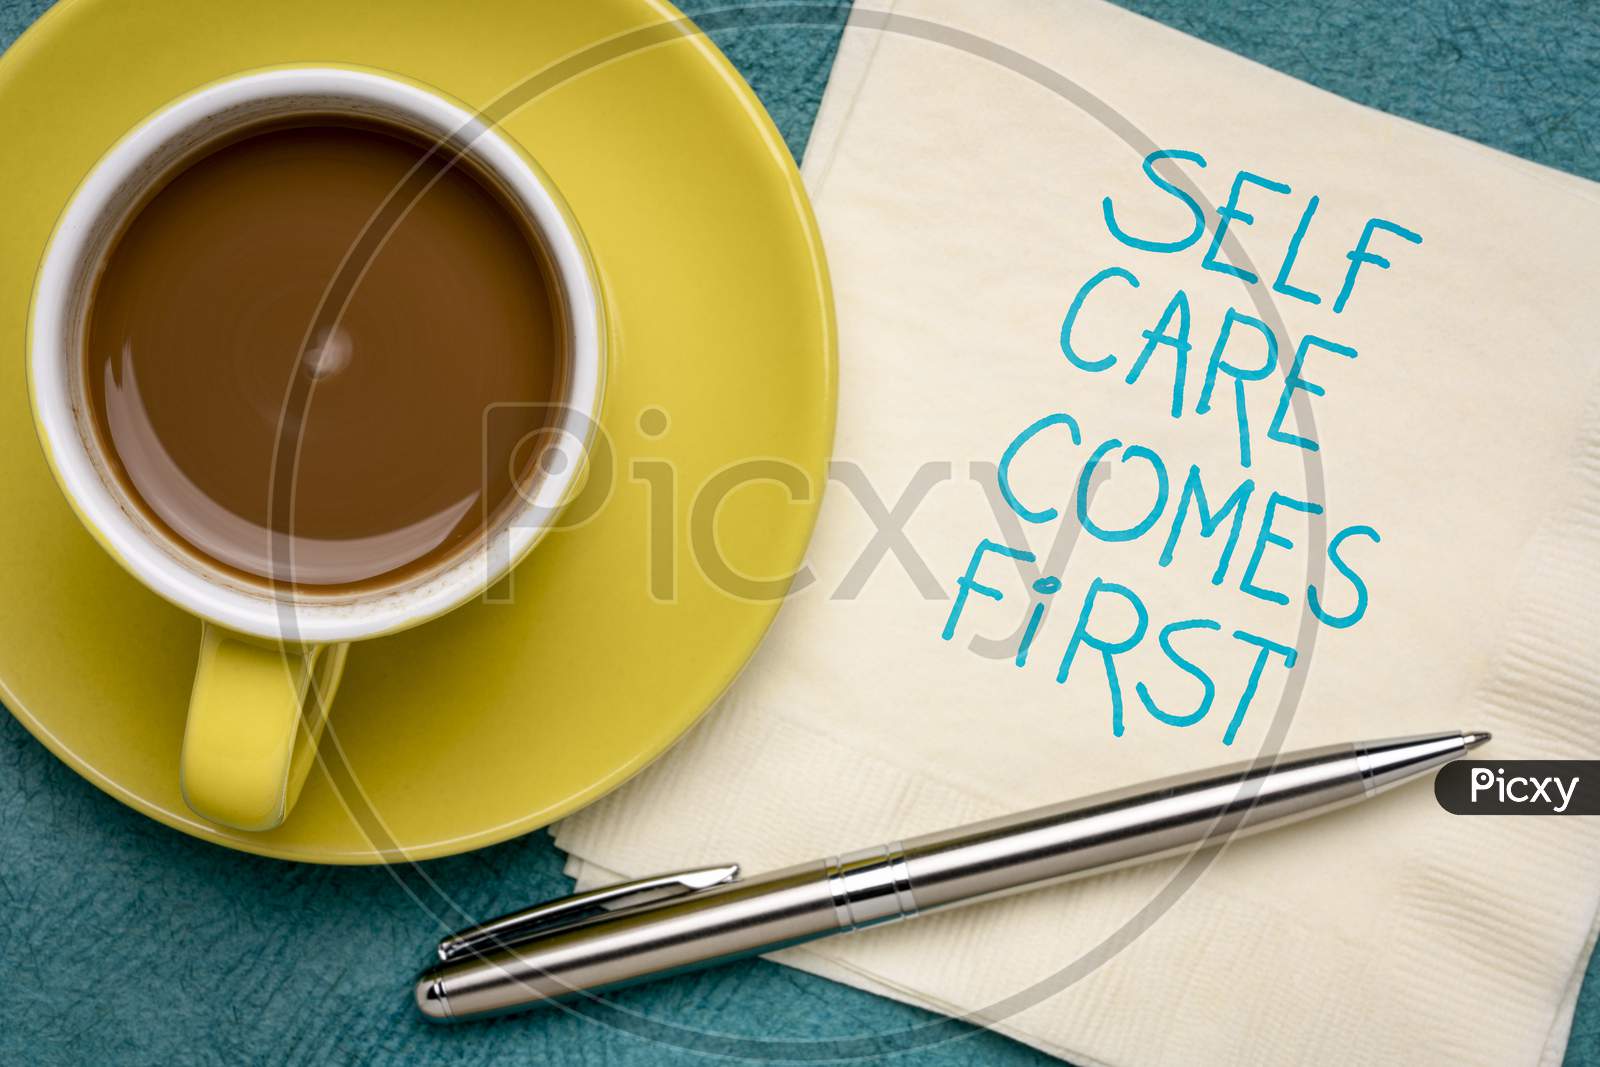 Self Care Comes First Inspirational Reminder - Handwriting On A Napkin With Coffee, Body Positive, Mental Health Slogan